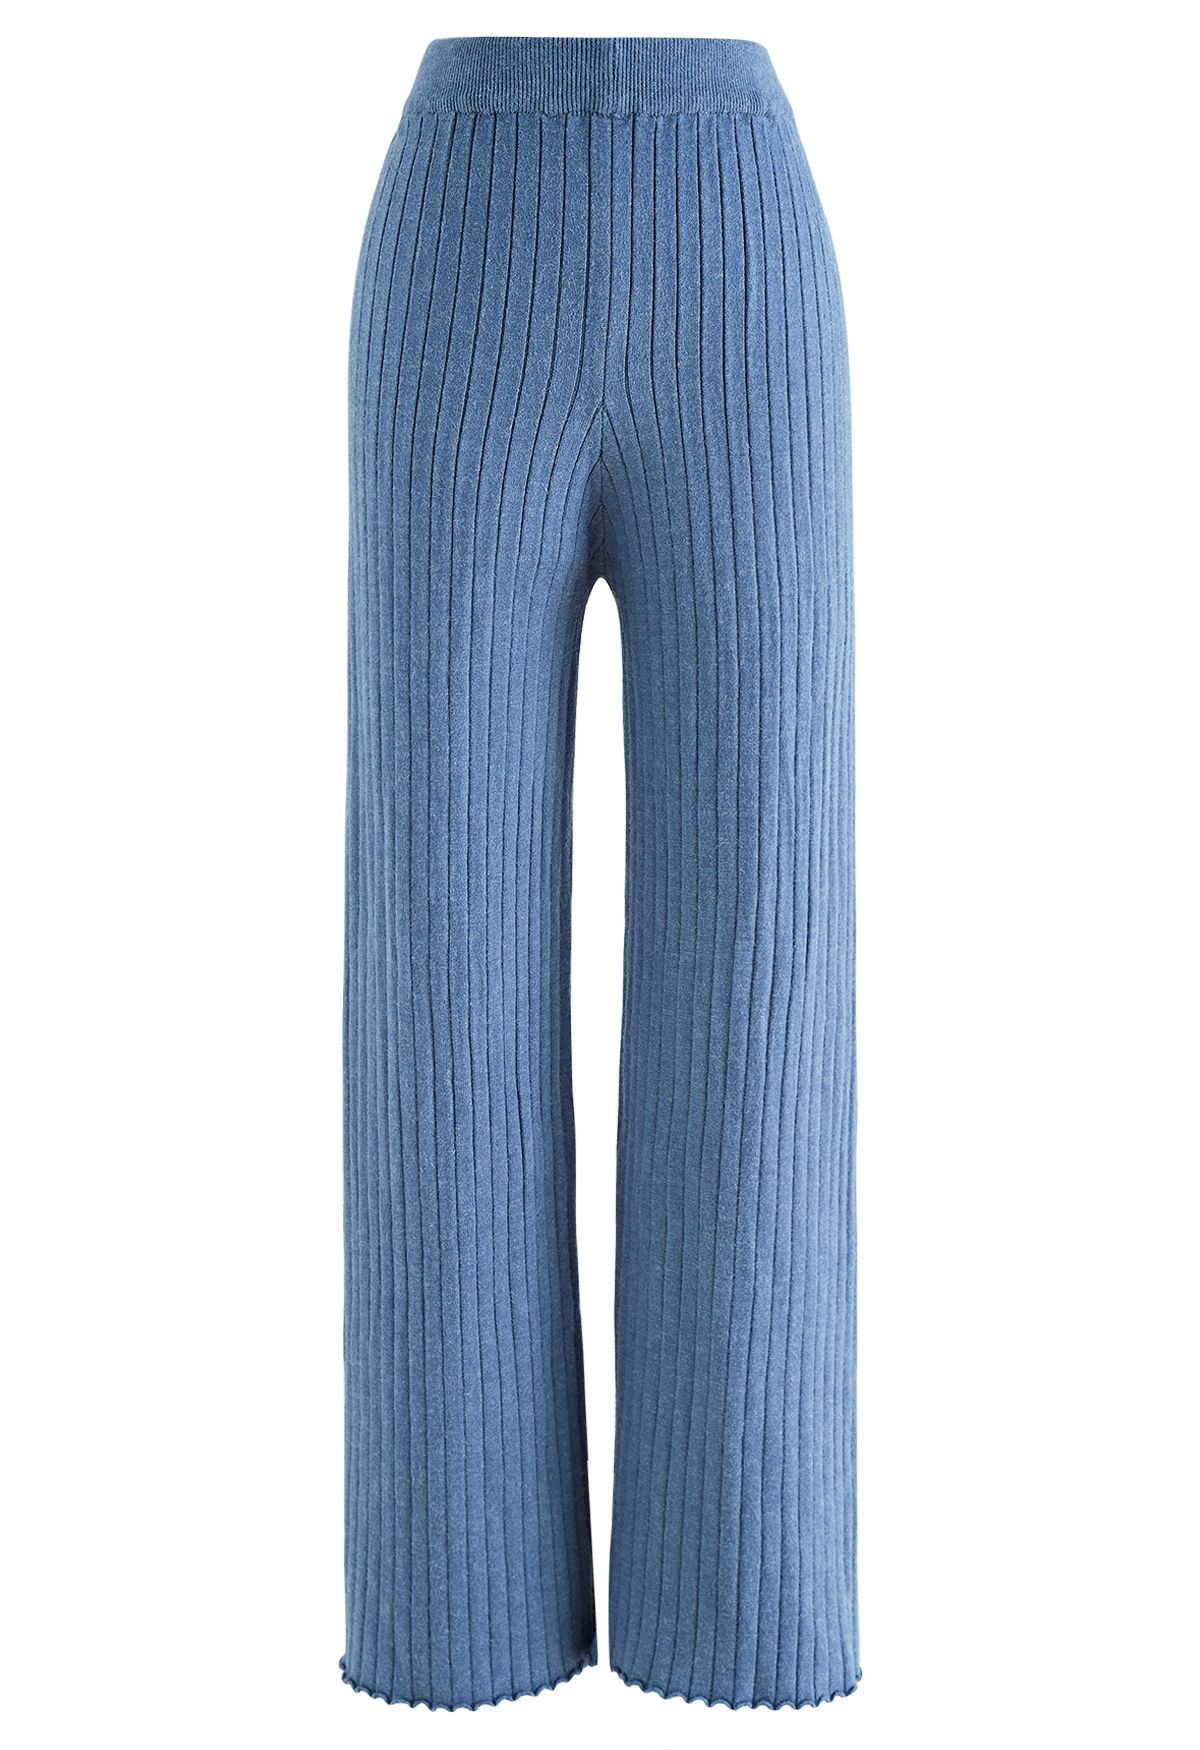 Ribbed Straight Leg Knit Pants in Blue